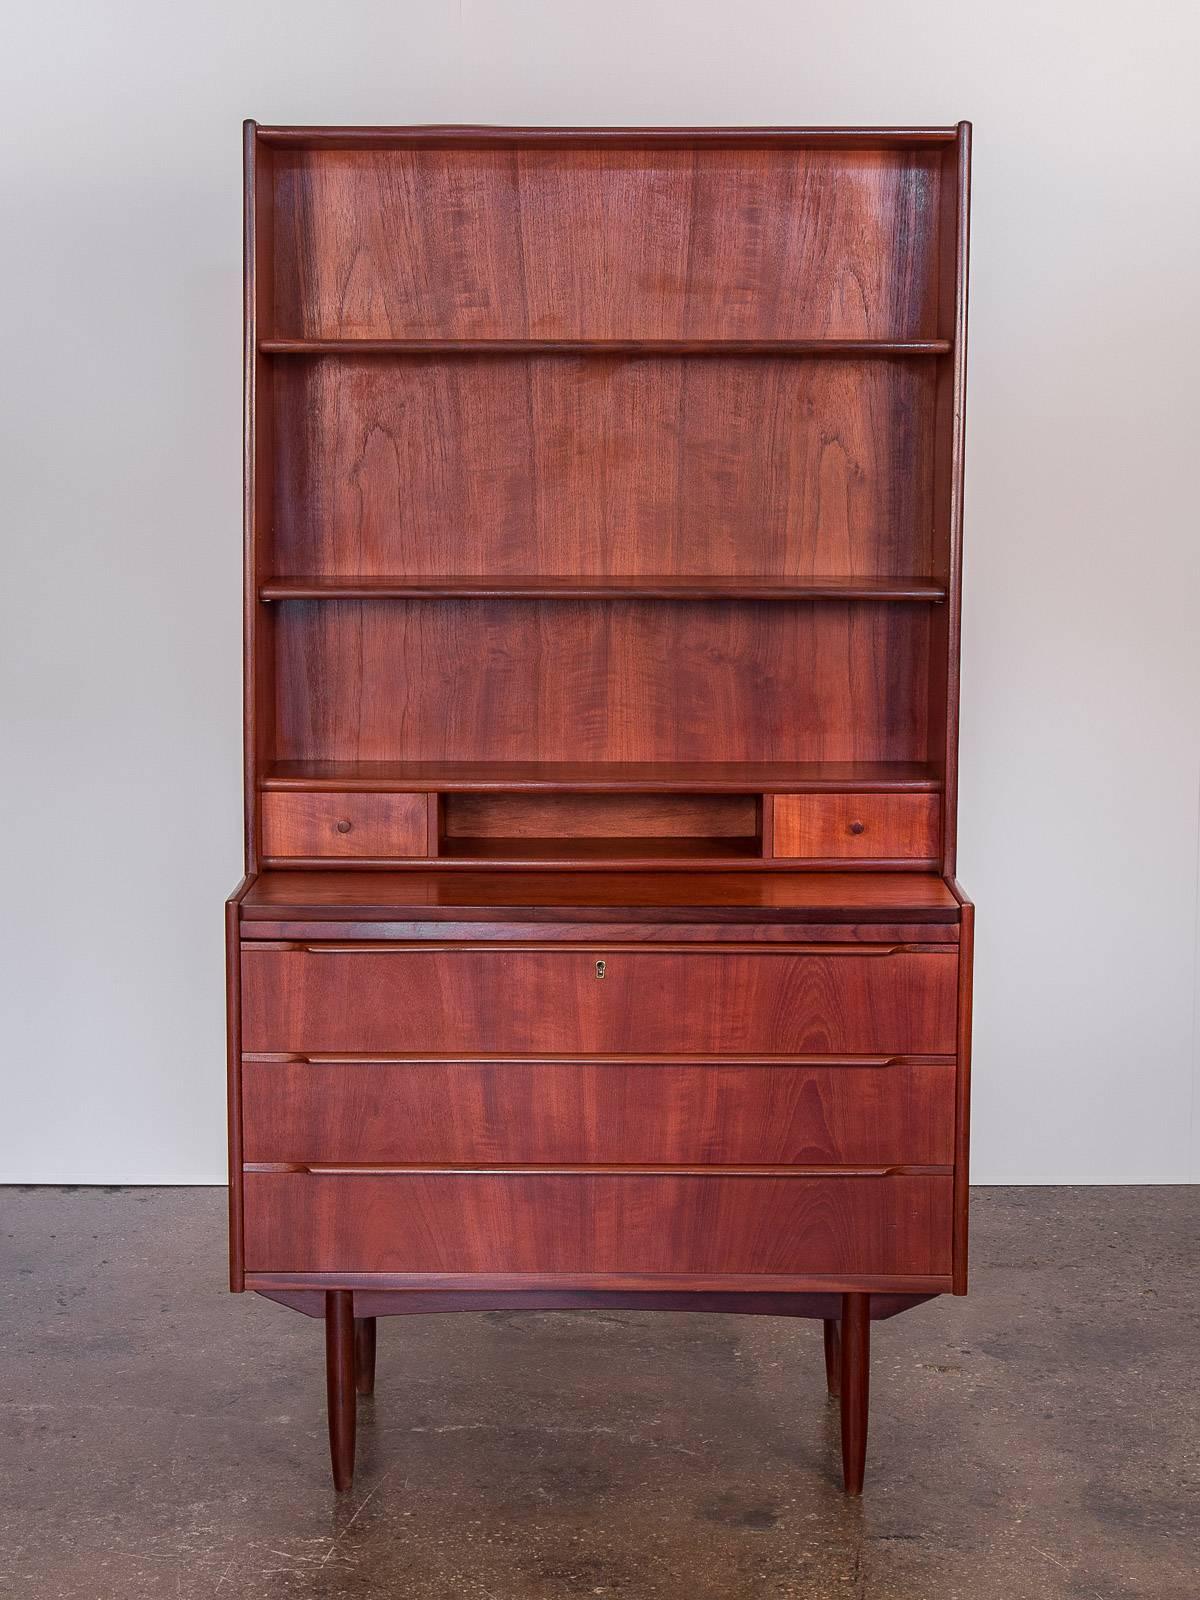 This attractive, gleaming Danish modern teak secretary dates to the 1960s. The top shelves are adjustable for two alternative heights and measure 7.5 inches deep. Two small desk drawers and three large drawers on the bottom provide versatile